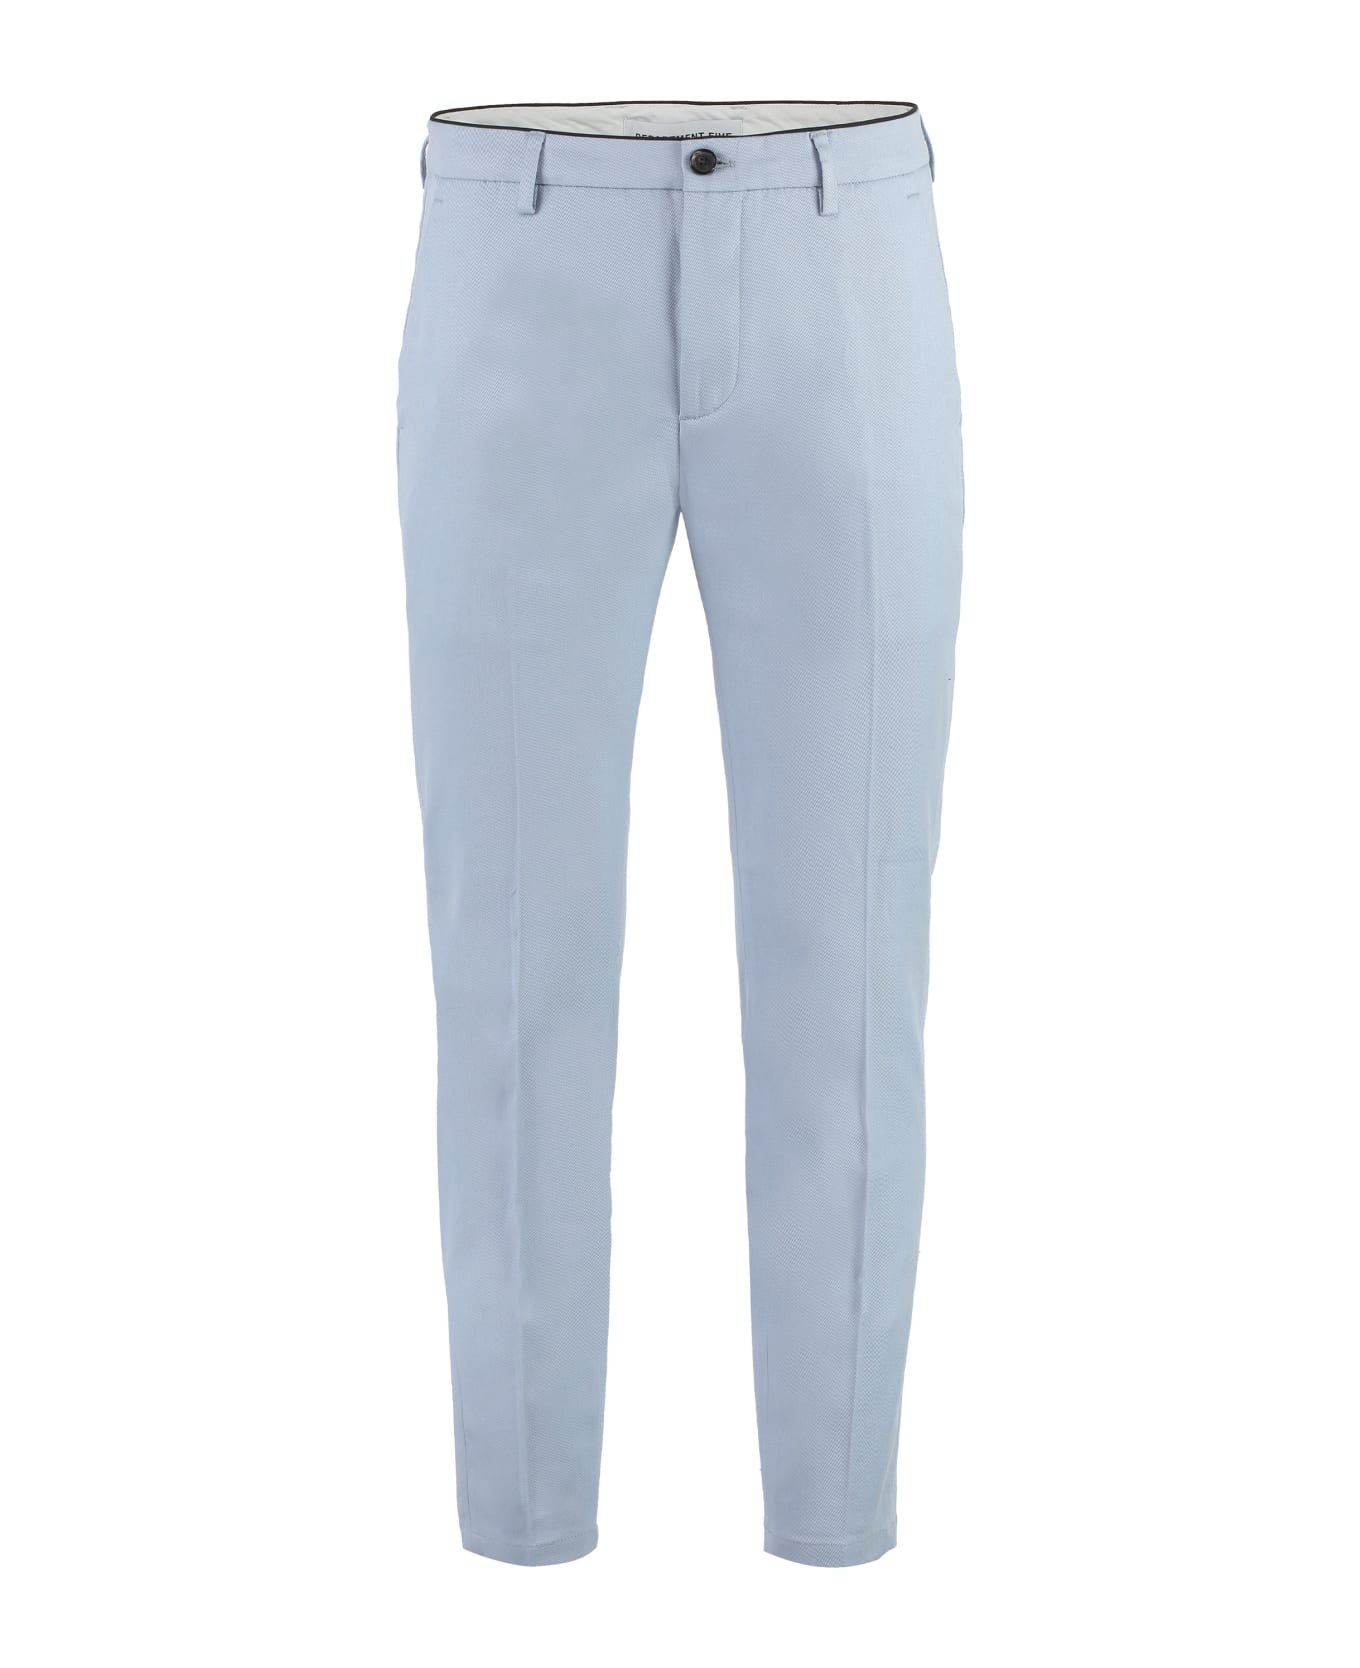 Department Five Prince Chino Pants - Light Blue